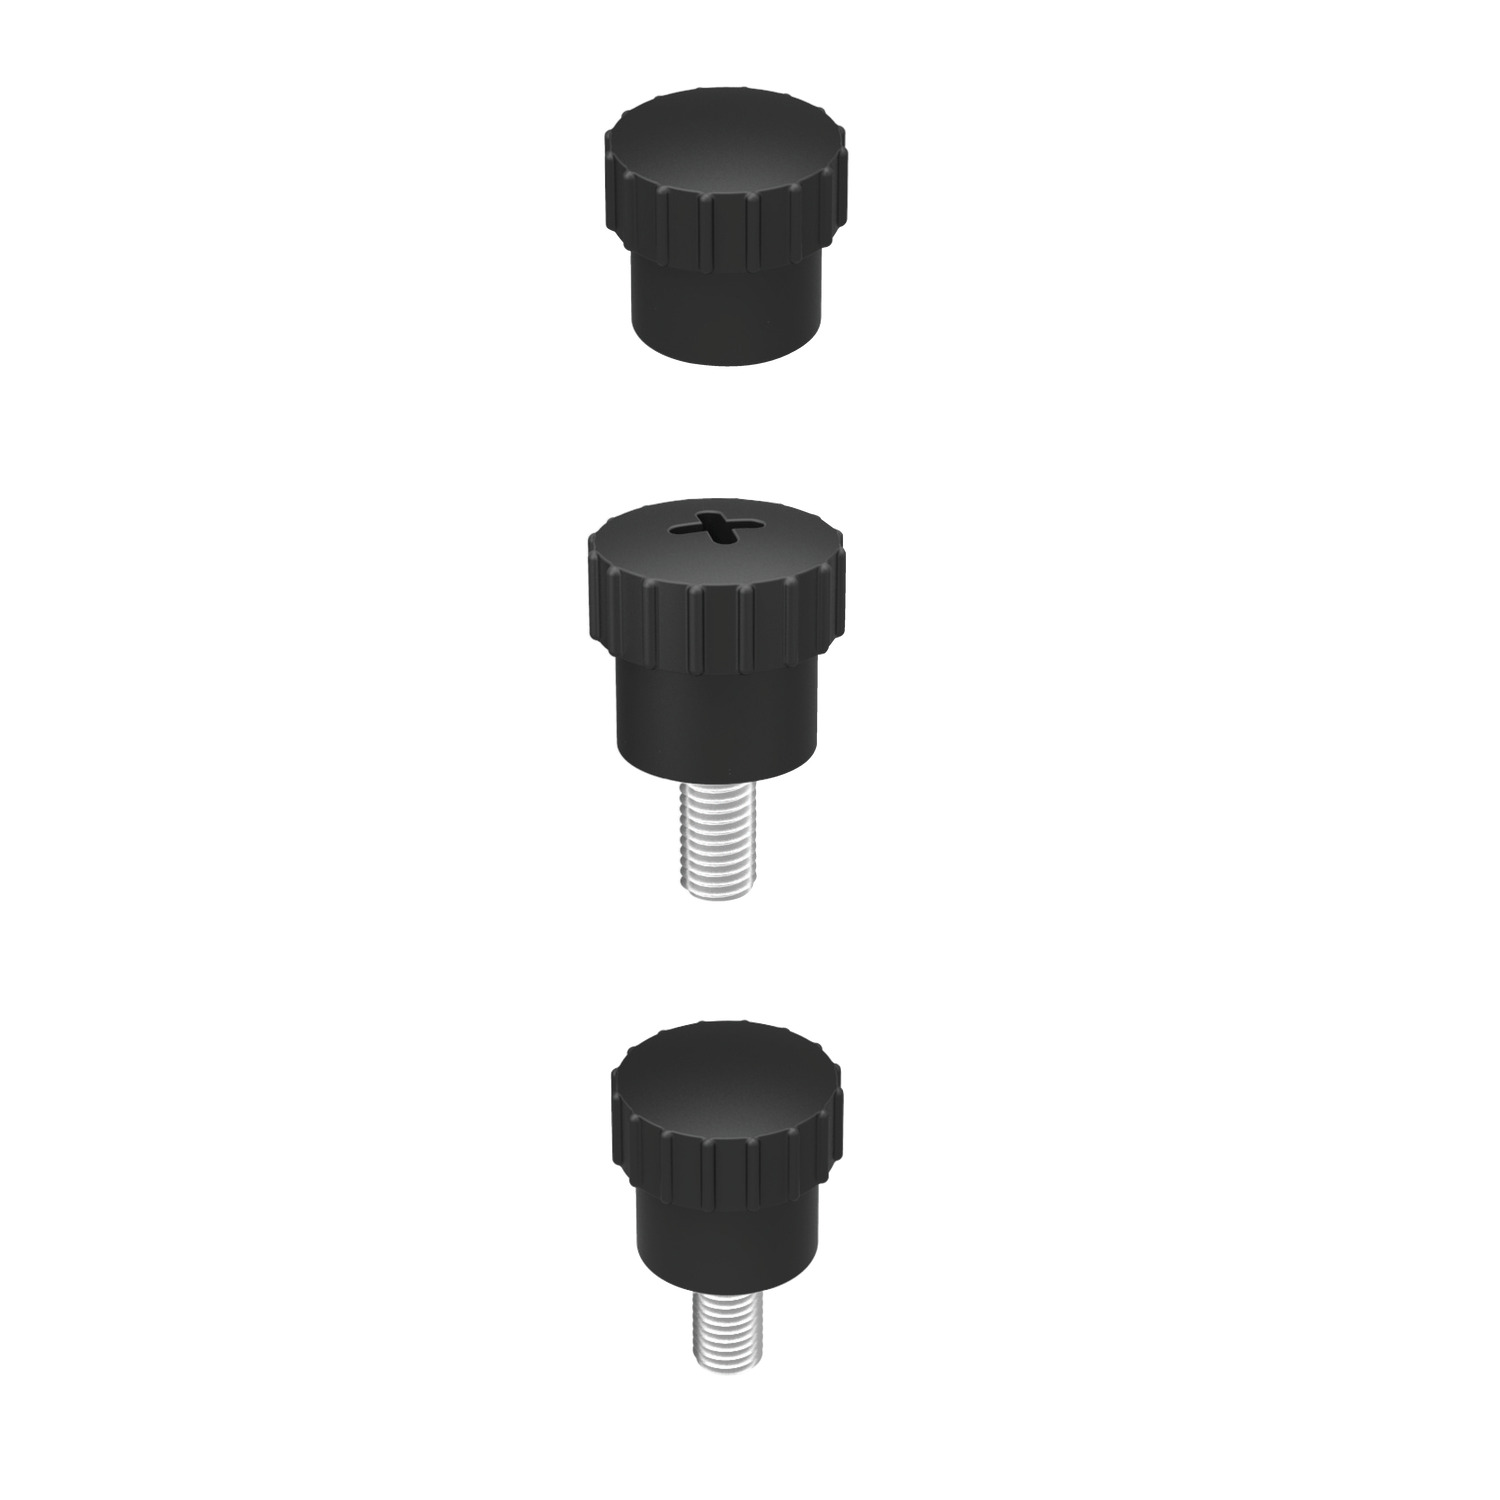 Knurled Knobs Plastic Thumb Nuts with brass bush or Thumb Screw with steel thread.